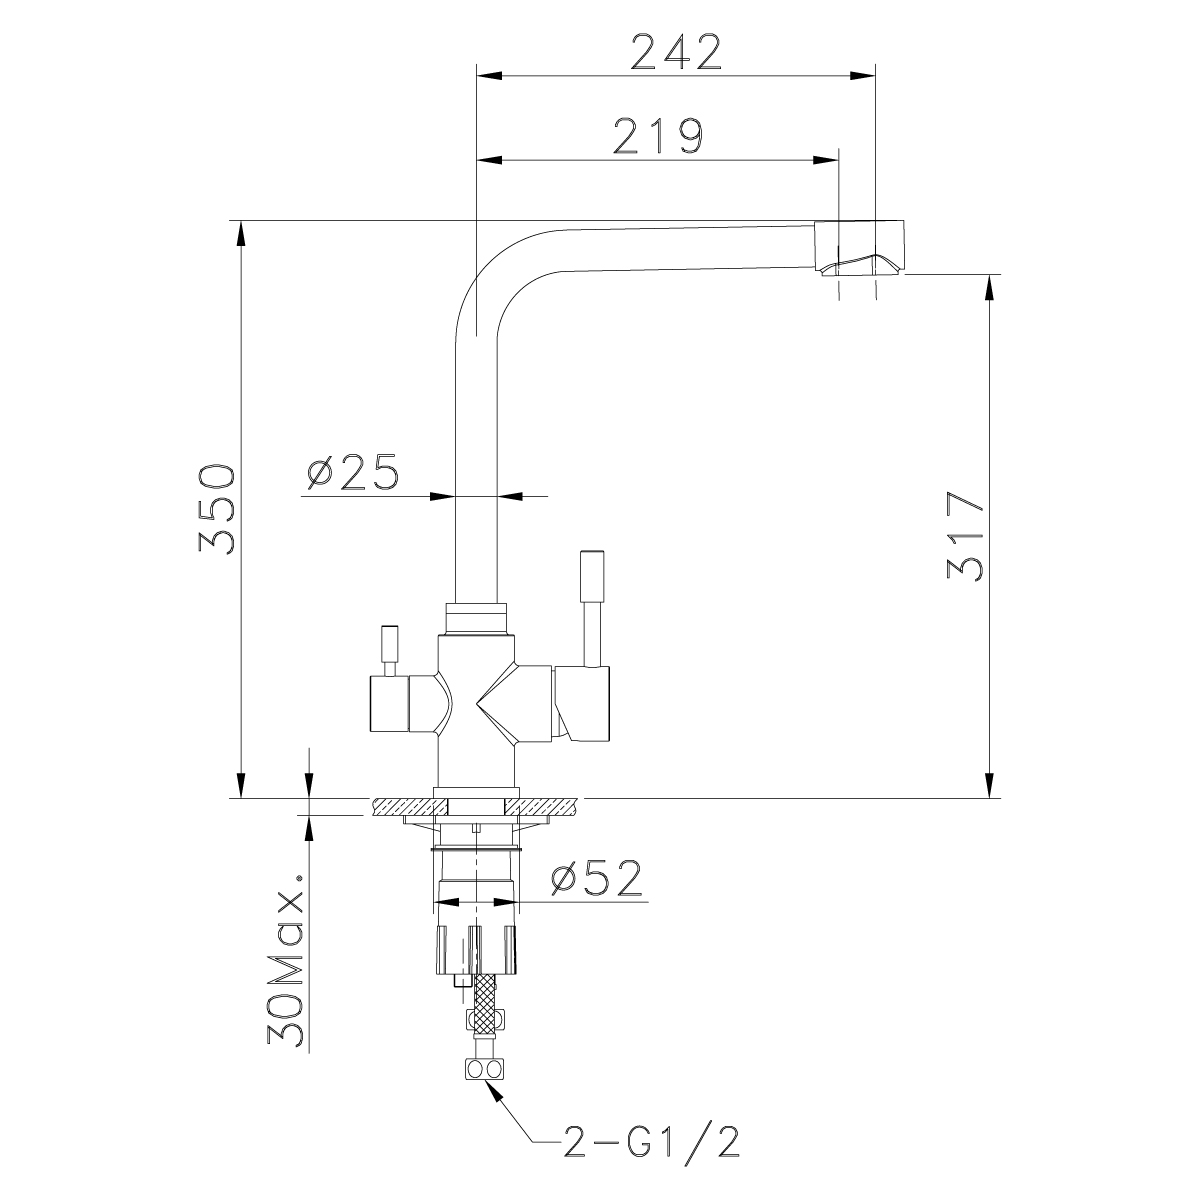 LM5060S Kitchen faucet
with connection to drinking water supply